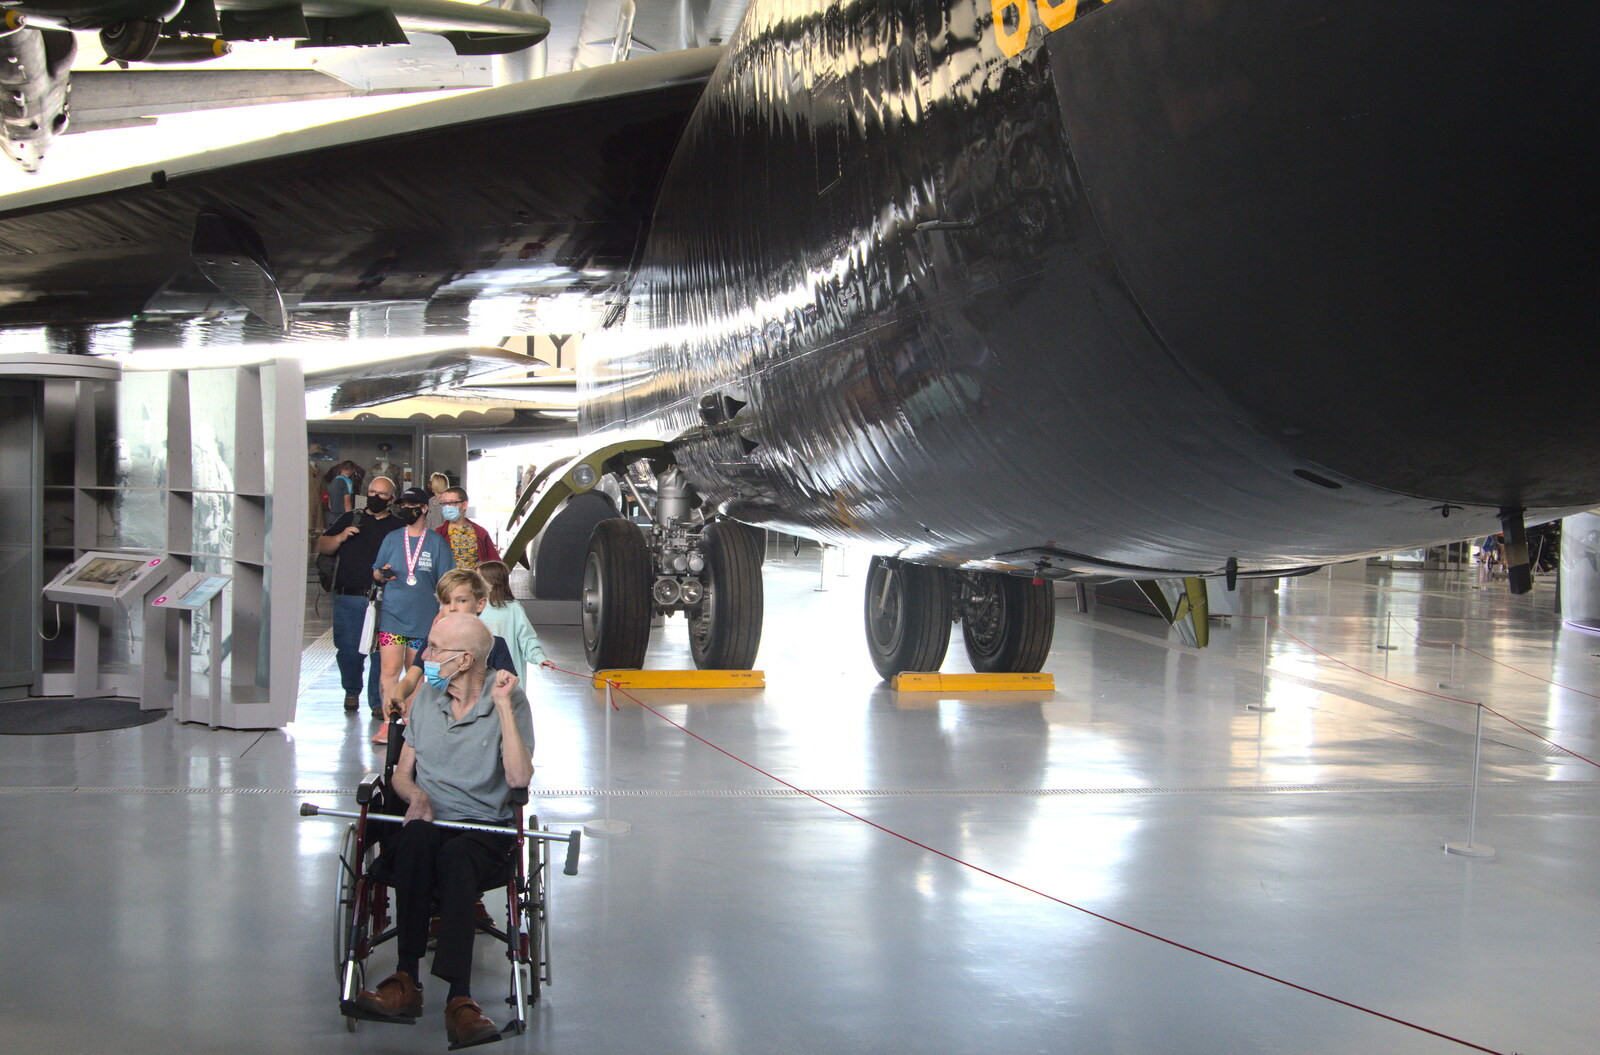 Grandad under the belly of a B-52 bomber from The Duxford Dash, IWM Duxford, Cambridge - 13th September 2020